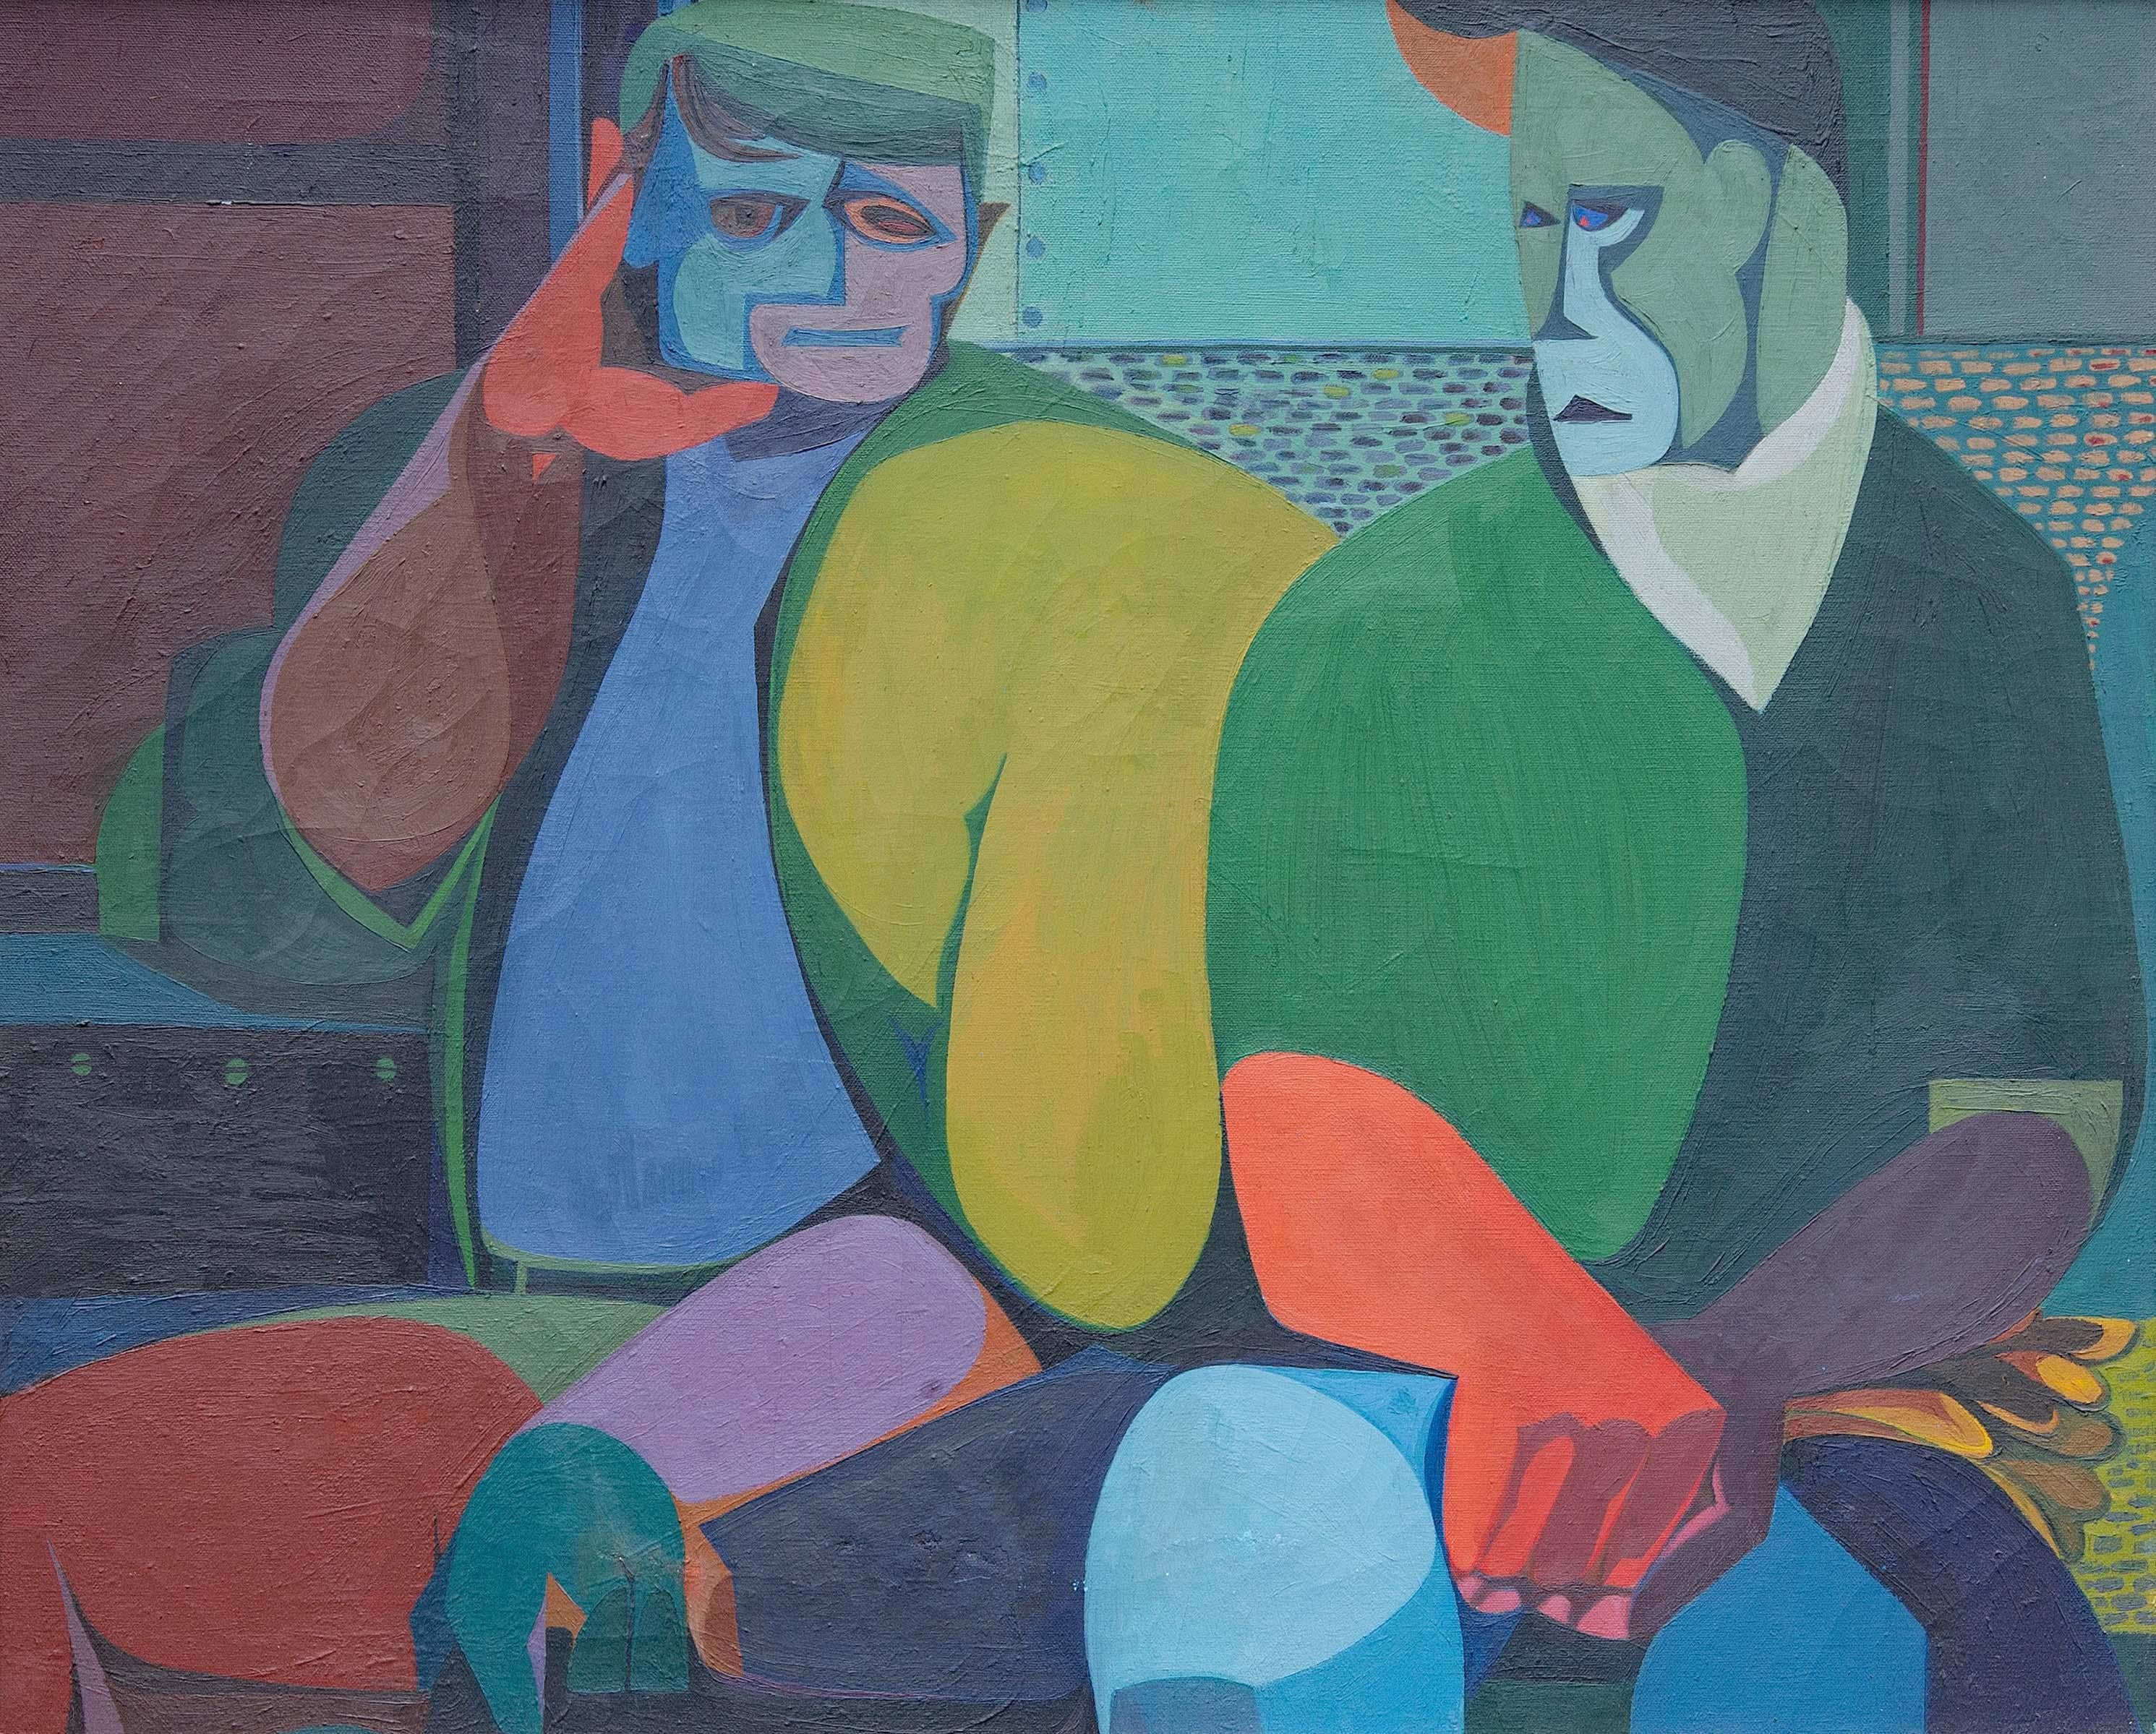 Unknown Figurative Painting - Abstract Painting "The Indestructibles" Industrial Workers Dated 1949